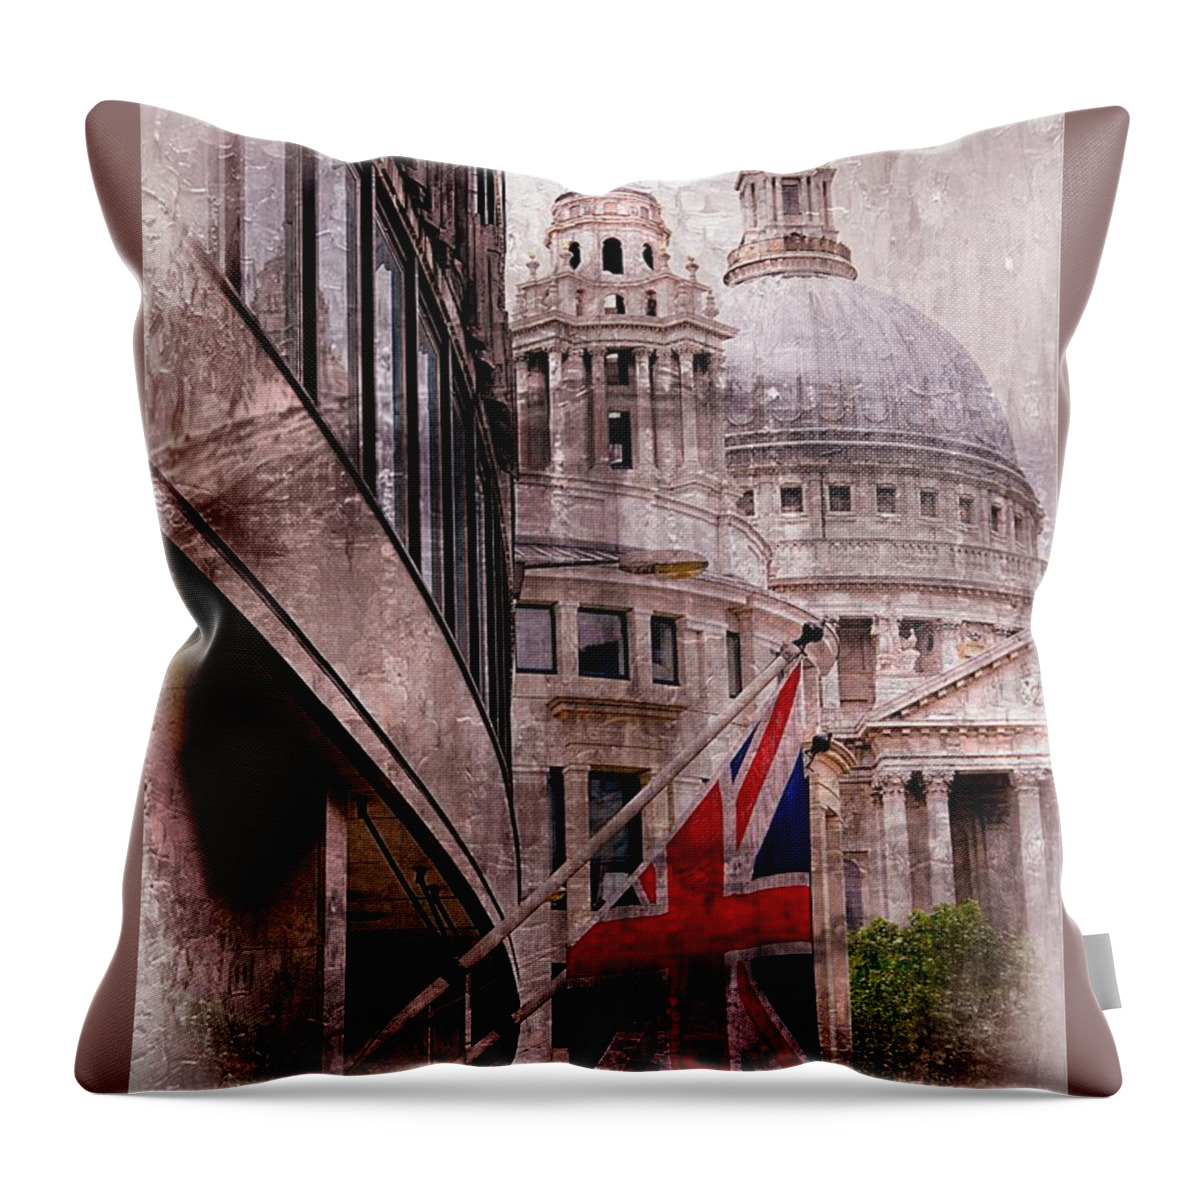 British Flag Throw Pillow featuring the photograph Union Jack by St. Paul's Cathdedral by Karen McKenzie McAdoo